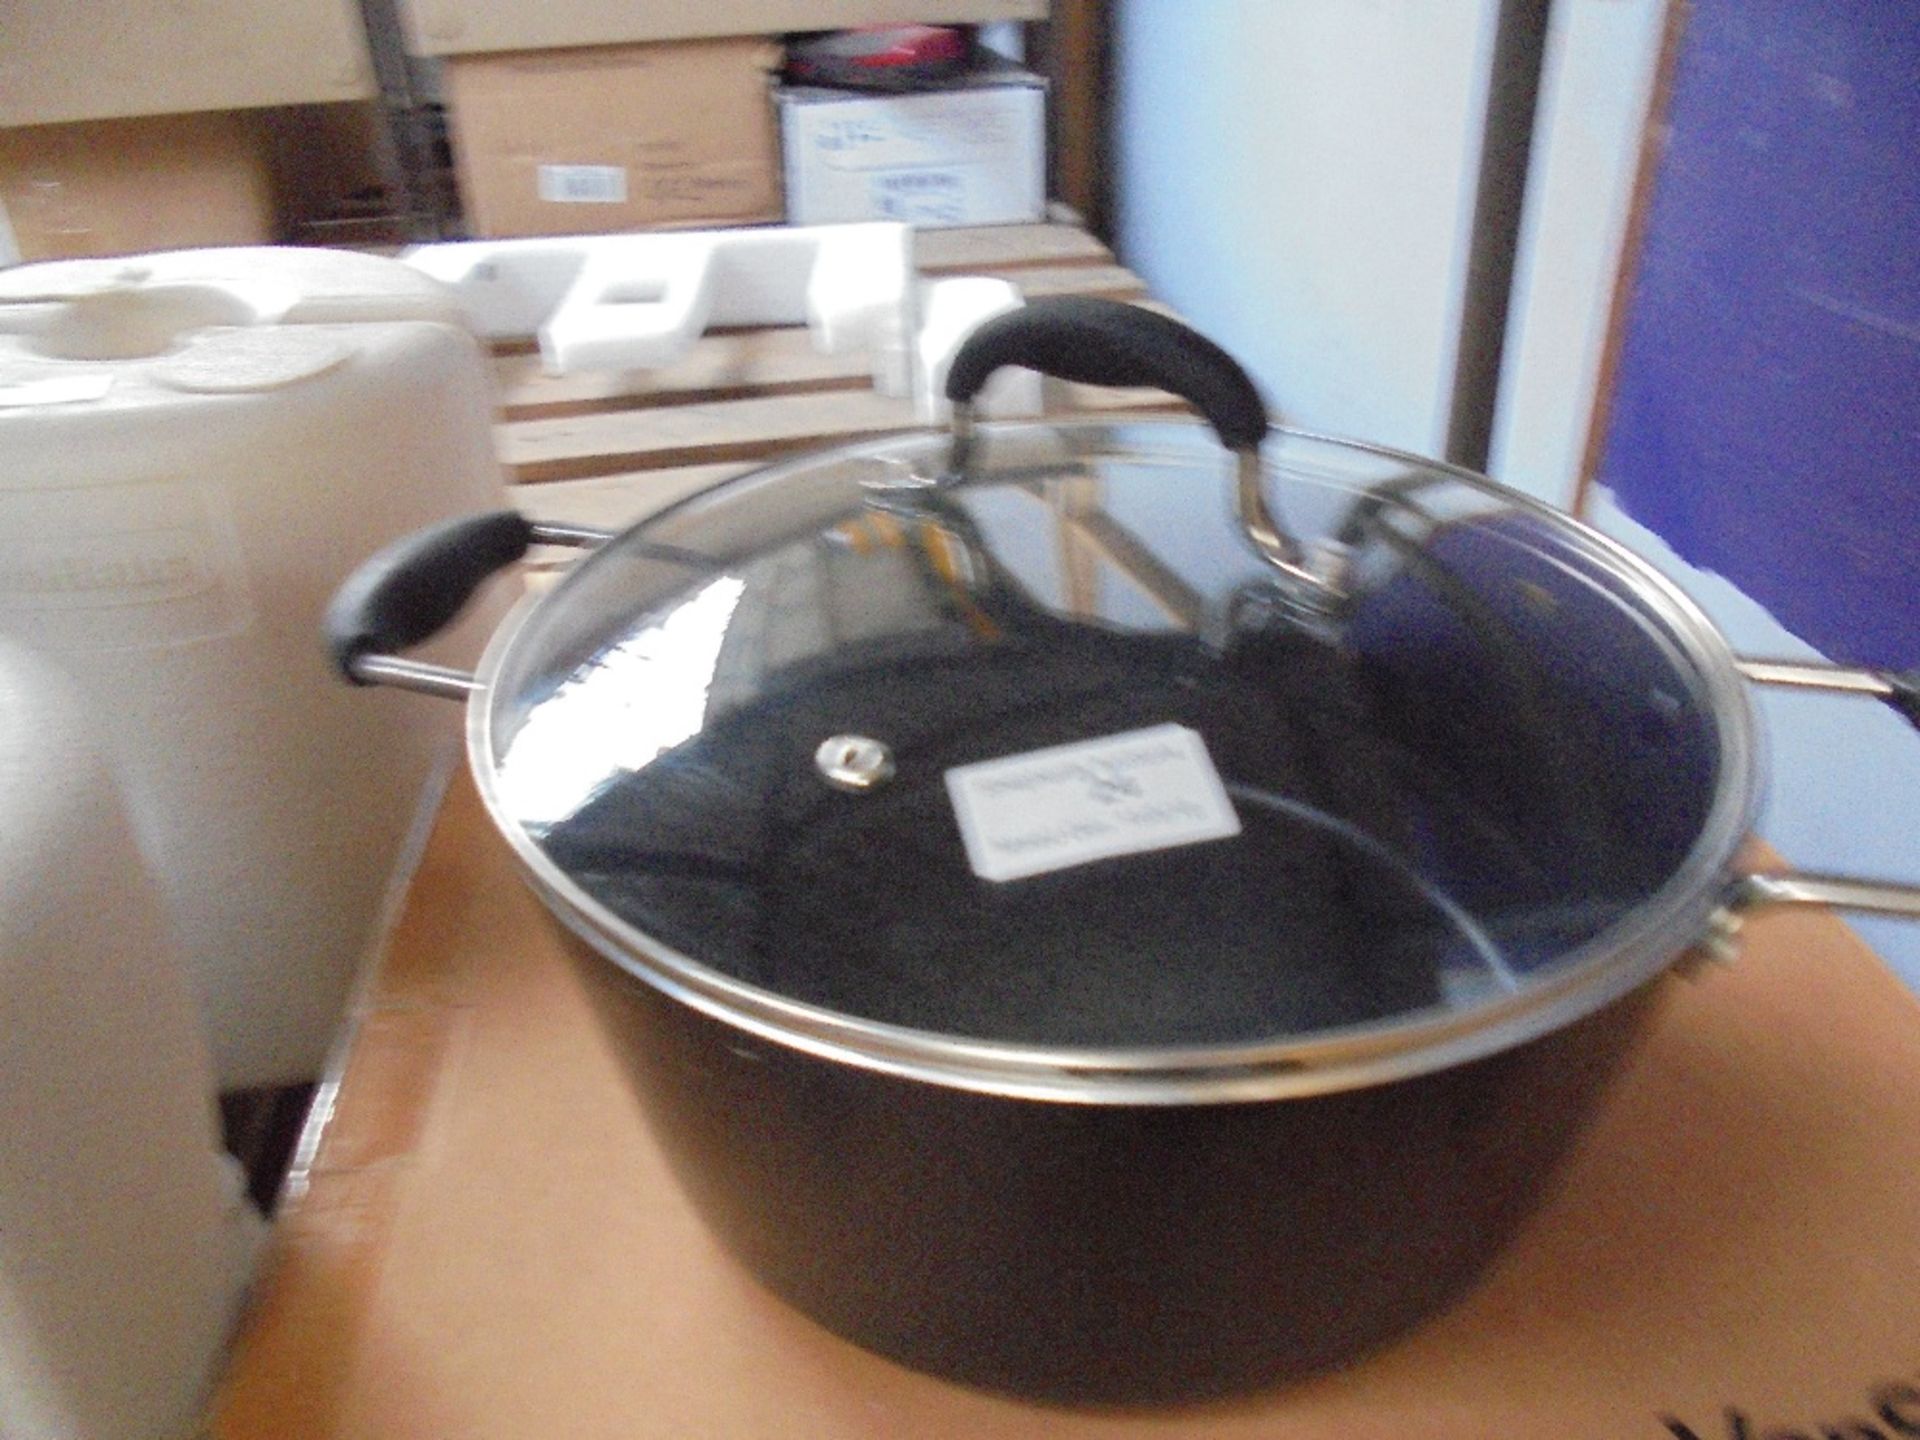 Stock Pot 24cm with lid new & boxed Please note by Bidding on this item you agree to the following